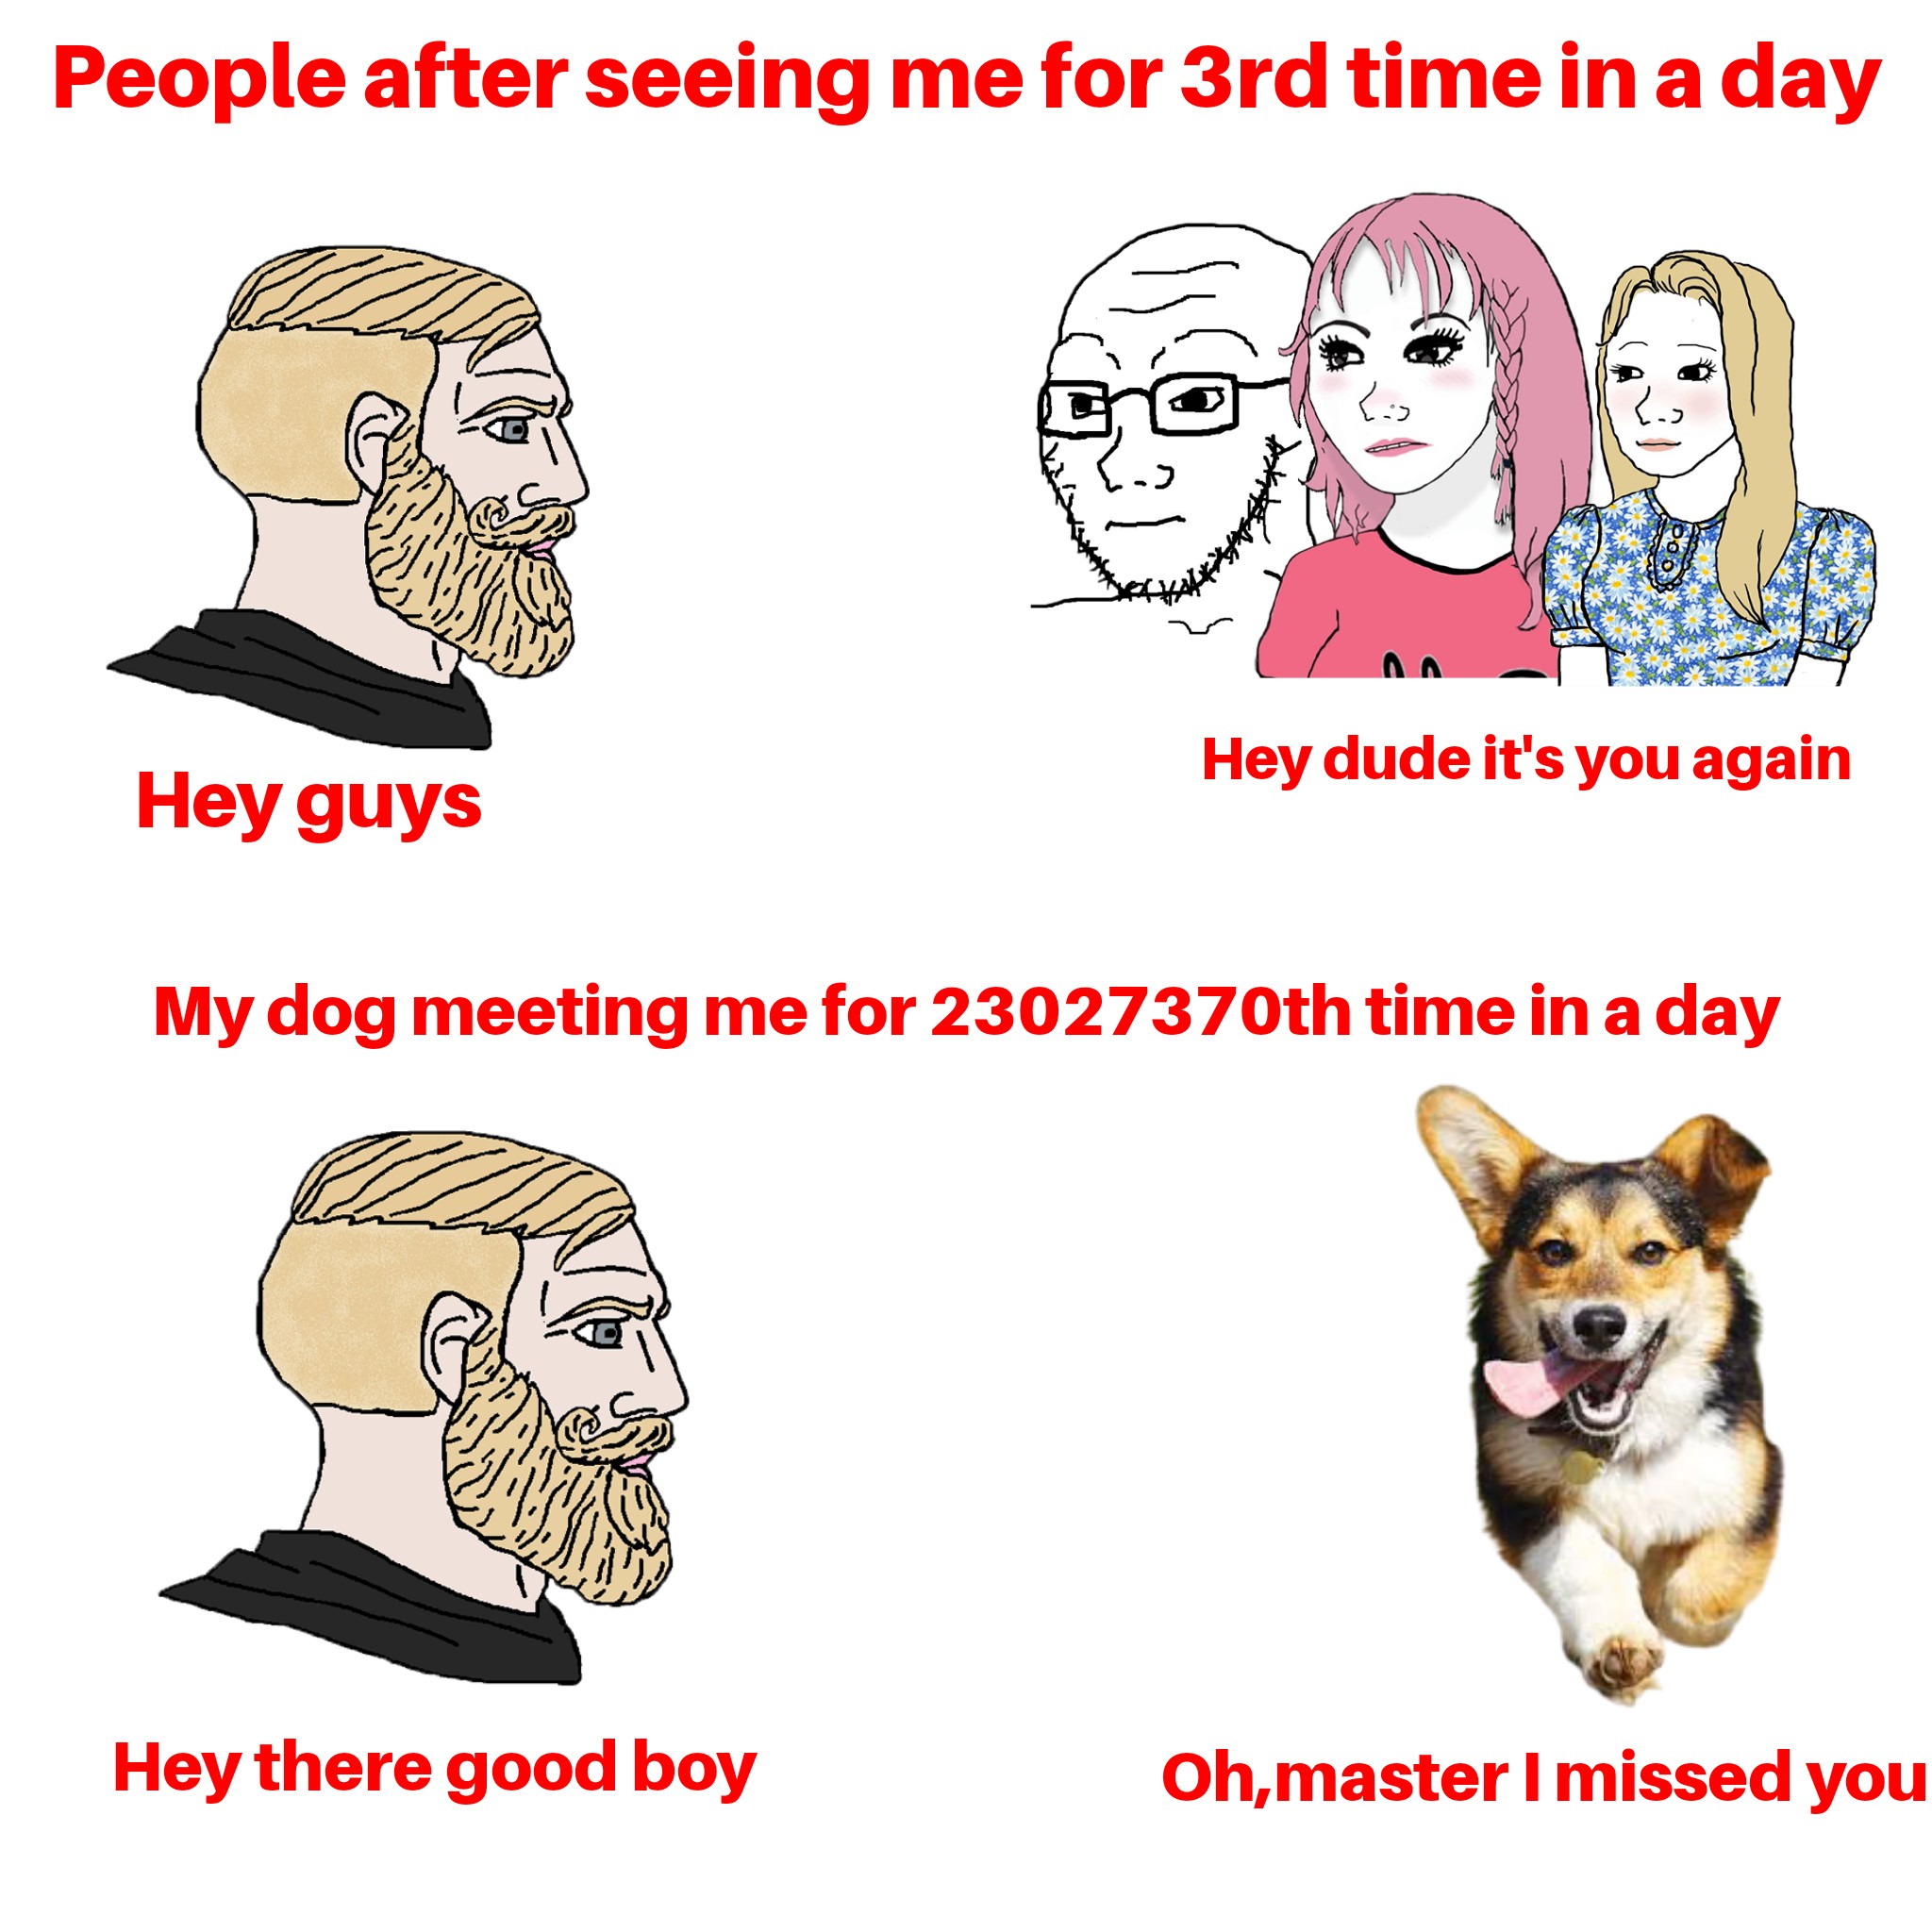 dank memes - women with a time machine meme - People after seeing me for 3rd time in a day Hey guys Hey dude it's you again My dog meeting me for 23027370th time in a day Hey there good boy Oh,master I missed you